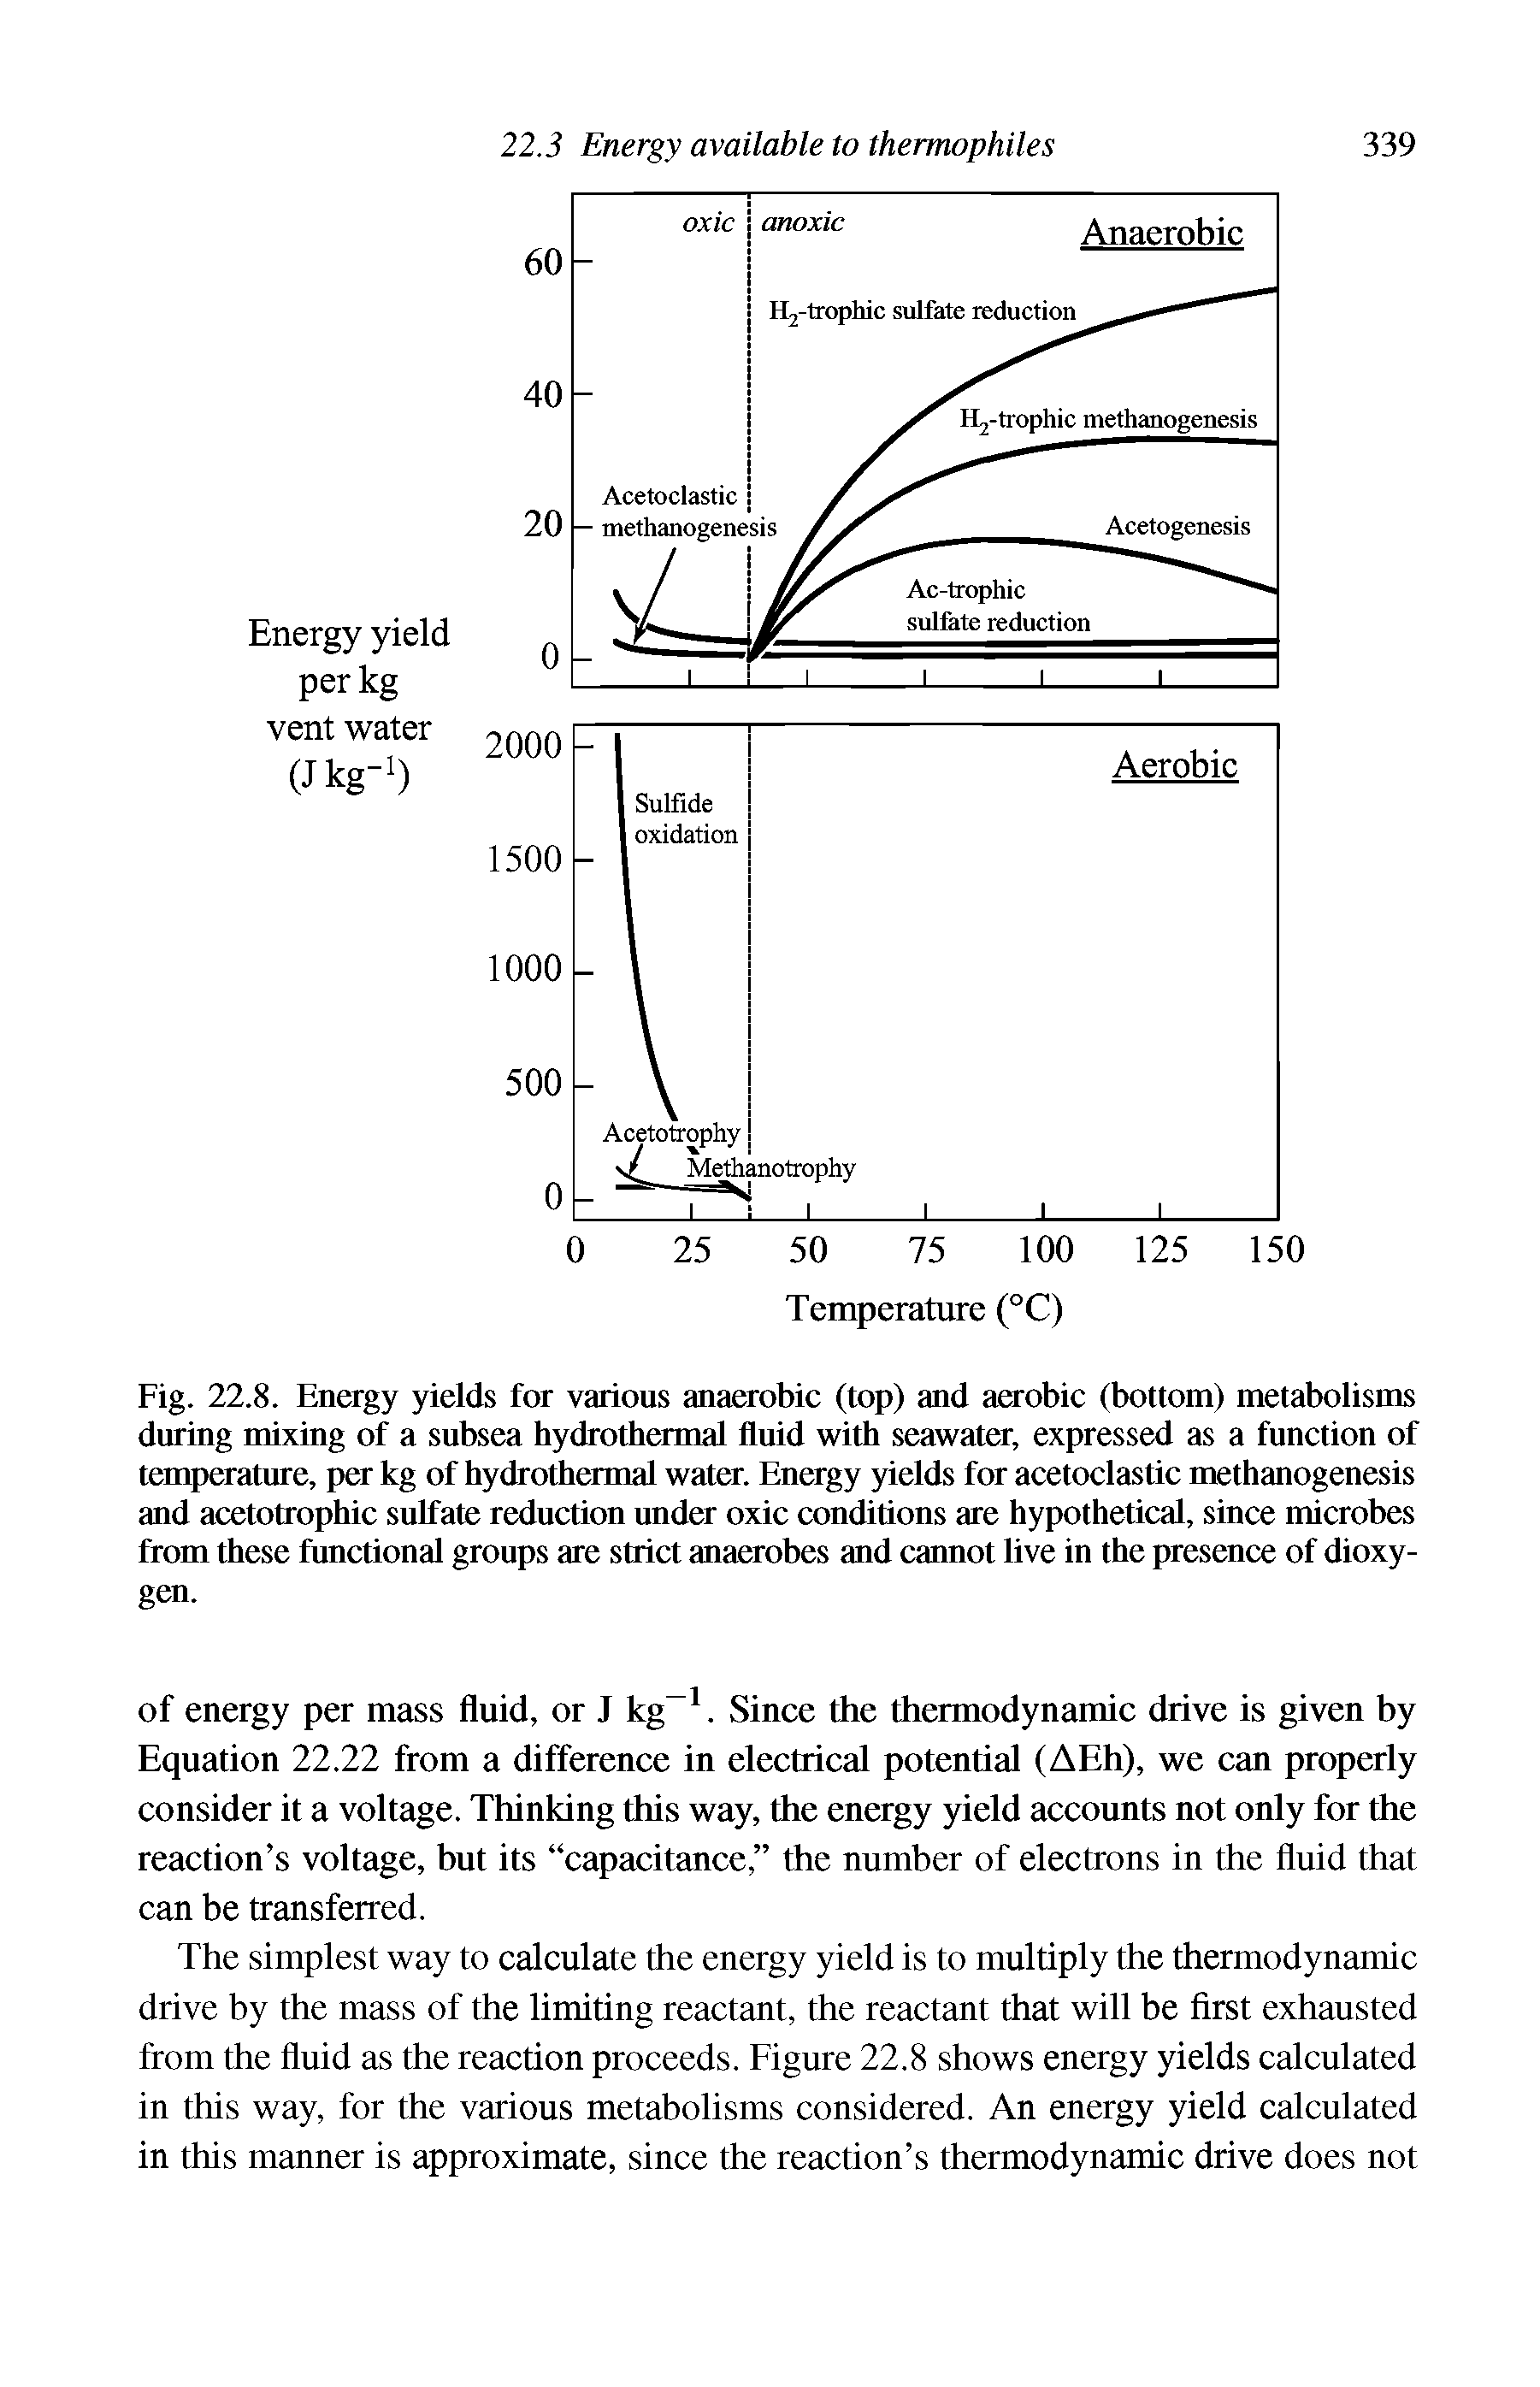 Fig. 22.8. Energy yields for various anaerobic (top) and aerobic (bottom) metabolisms during mixing of a subsea hydrothermal fluid with seawater, expressed as a function of temperature, per kg of hydrothermal water. Energy yields for acetoclastic methanogenesis and acetotrophic sulfate reduction under oxic conditions are hypothetical, since microbes from these functional groups are strict anaerobes and cannot live in the presence of dioxygen.